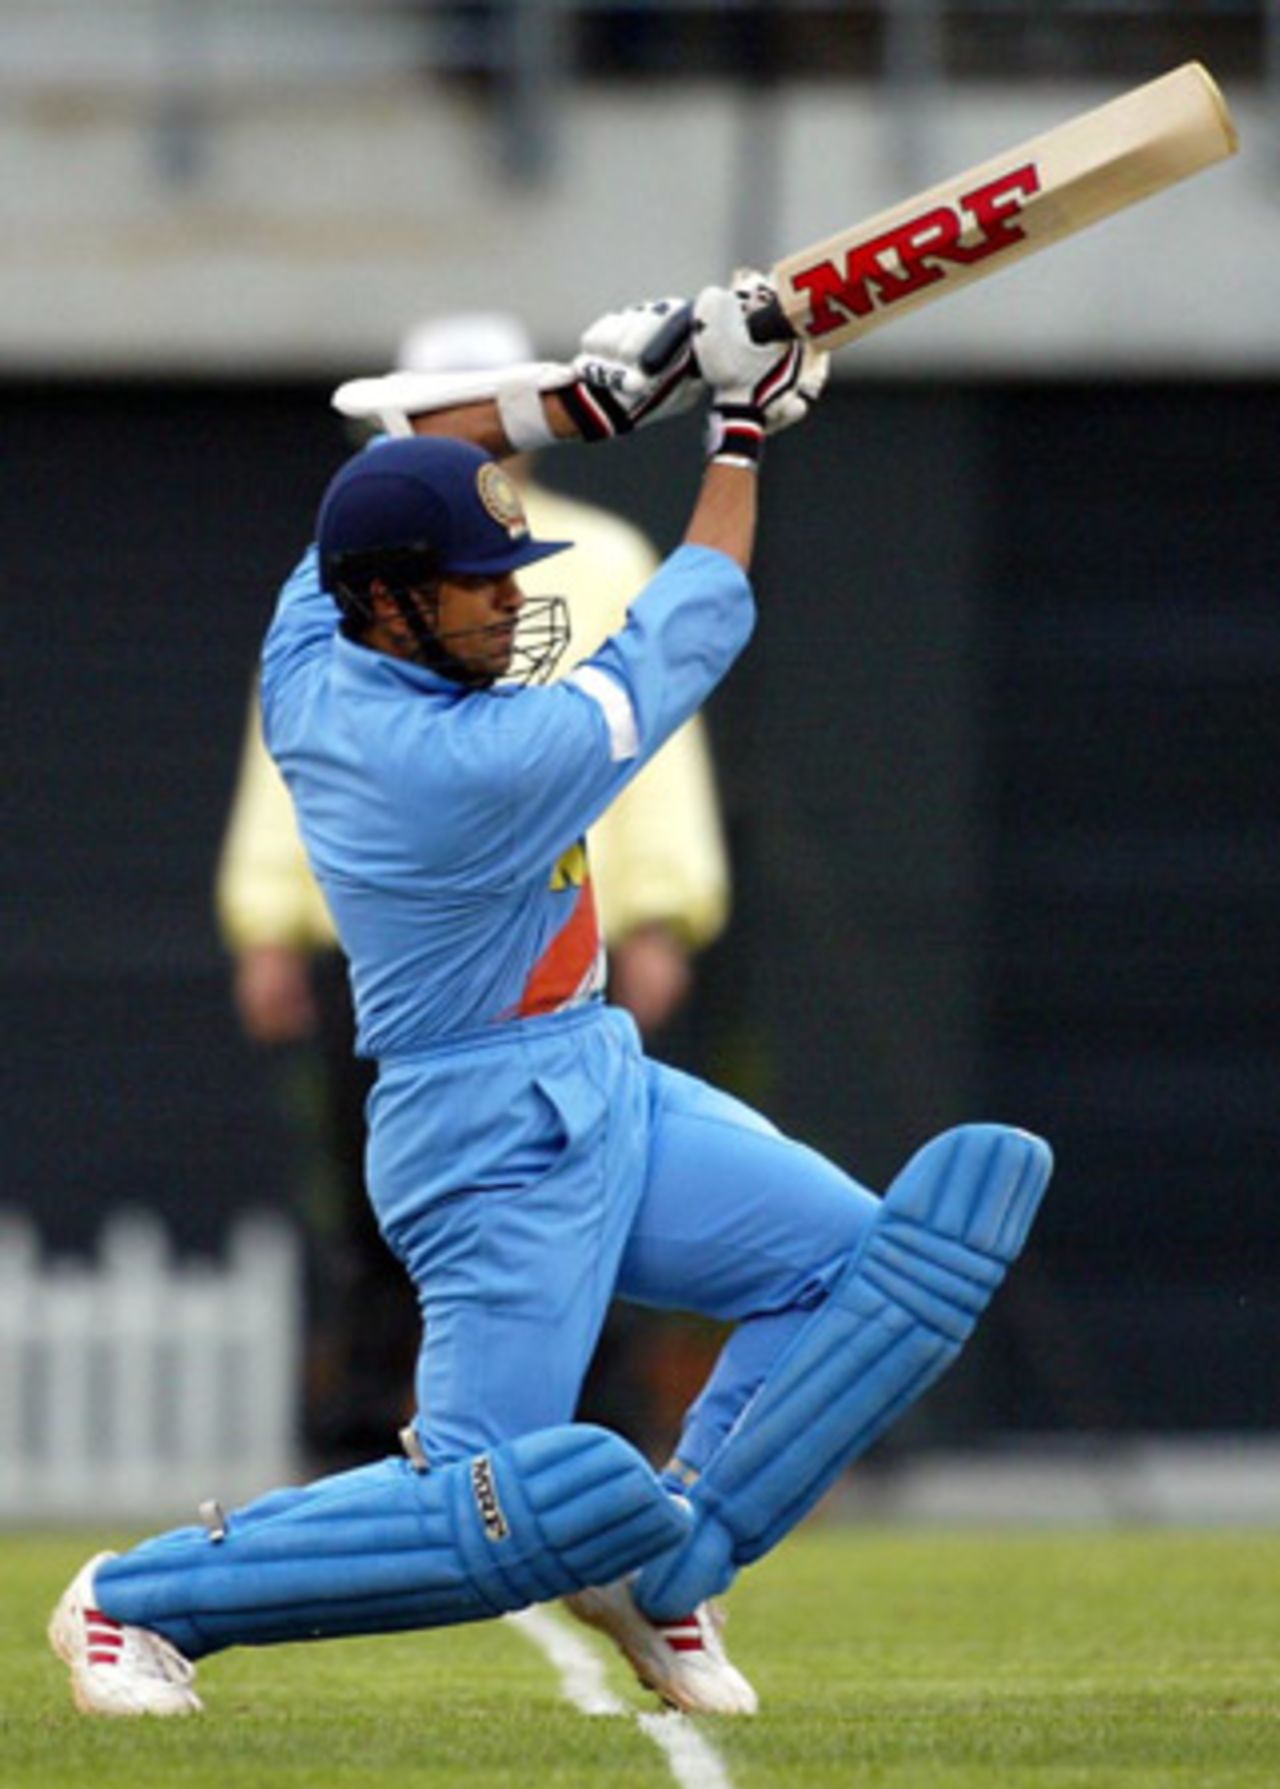 Indian batsman Tendulkar drives a delivery down the ground during his first innings of 72. Super Max International: New Zealand v India at Jade Stadium, Christchurch, 4 December 2002.